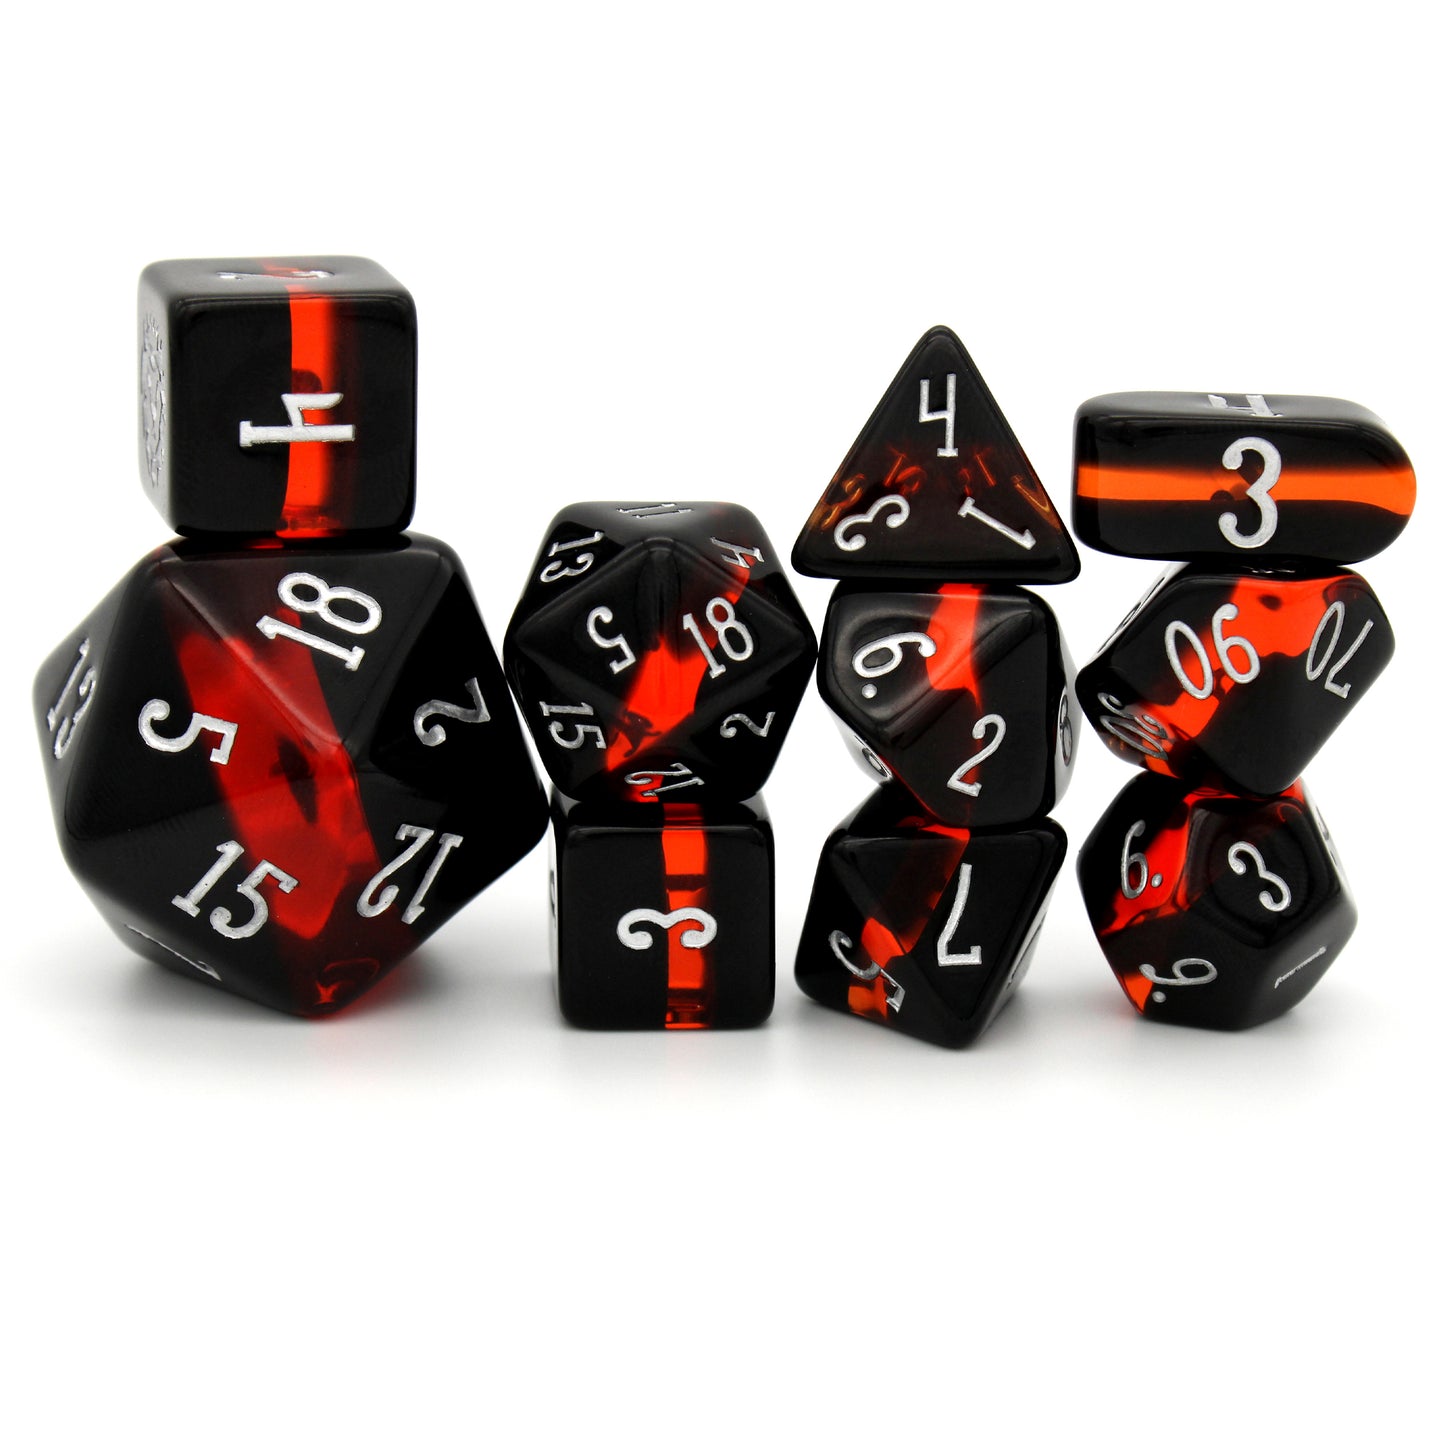 Magma Pool is a 10-piece set of layered resin dice in opaque black and translucent red, inked in silver.